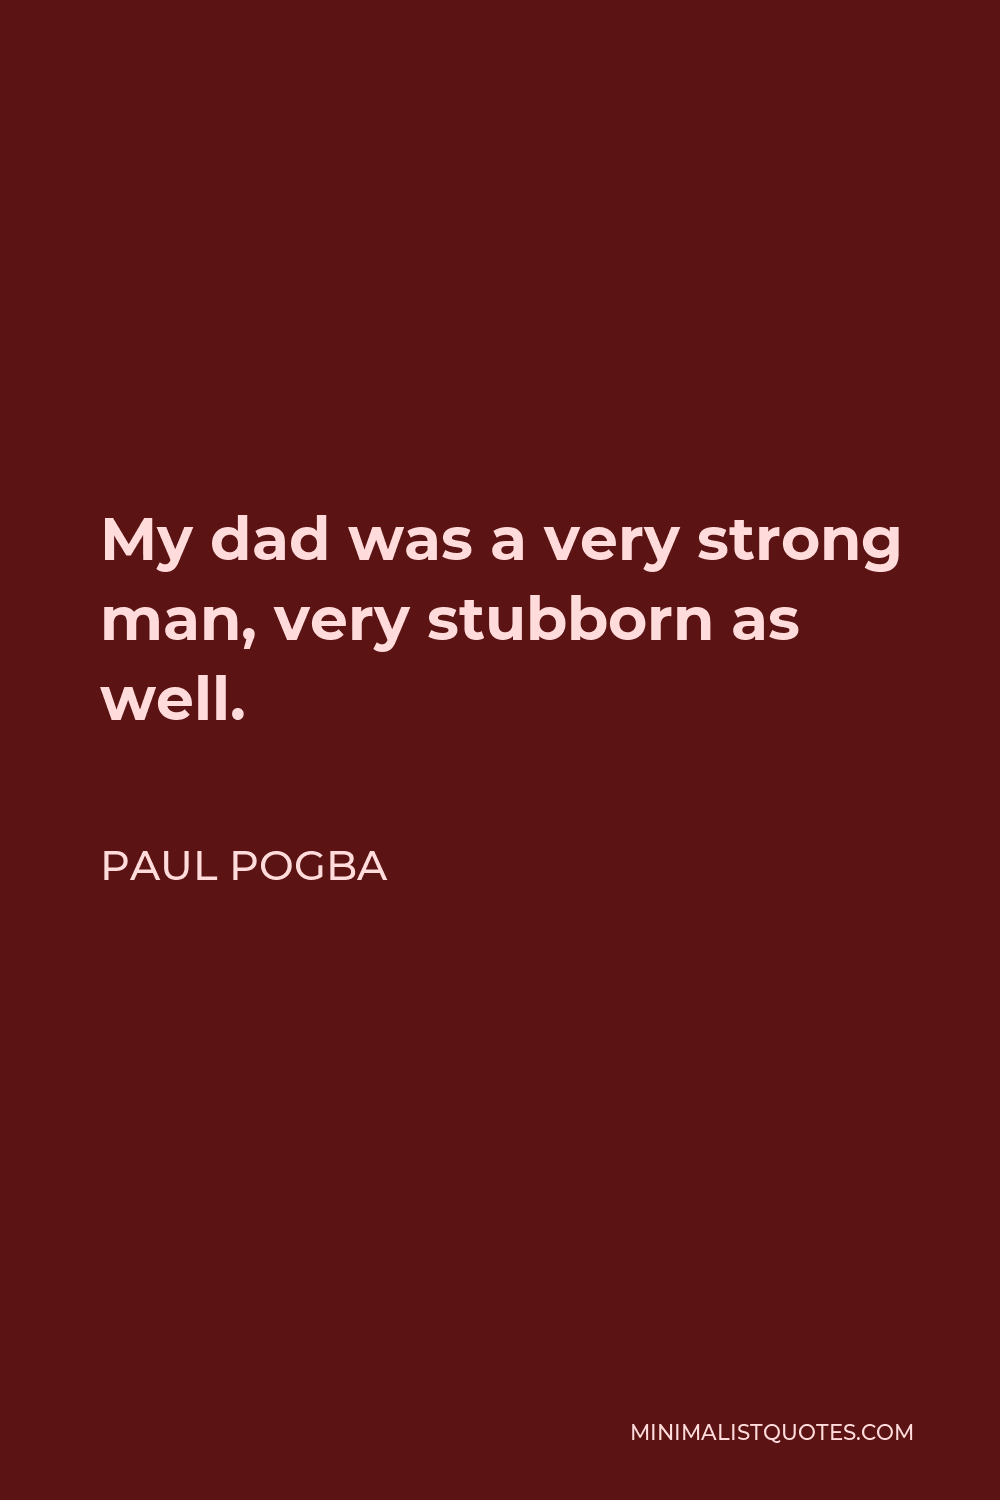 Paul Pogba Quote - My dad was a very strong man, very stubborn as well.